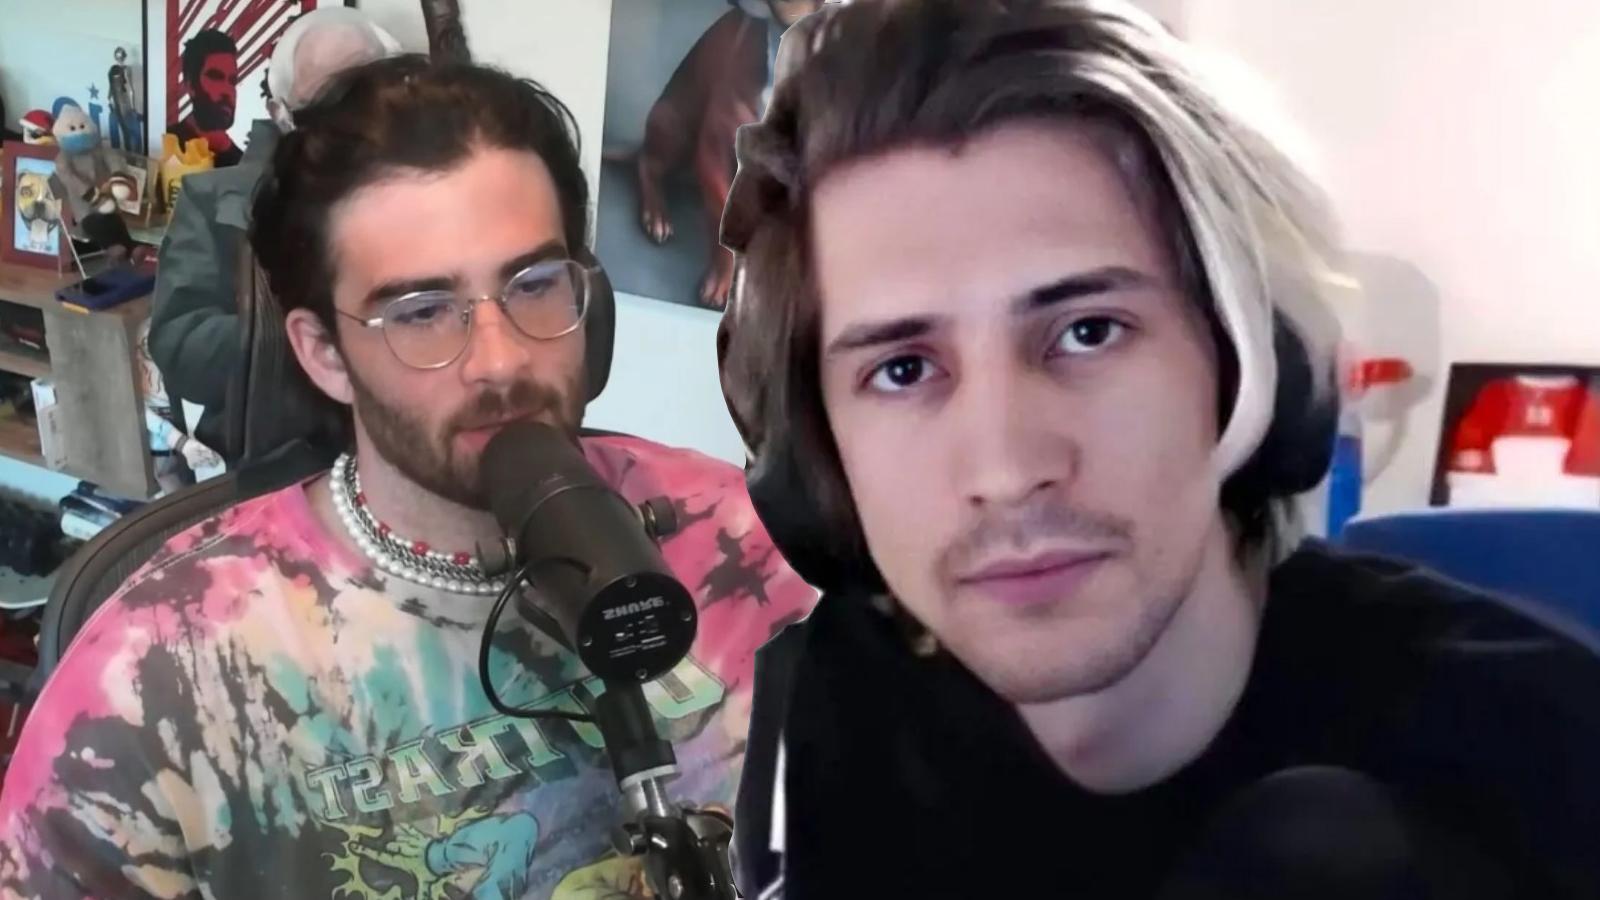 xqc and hasan on twitch